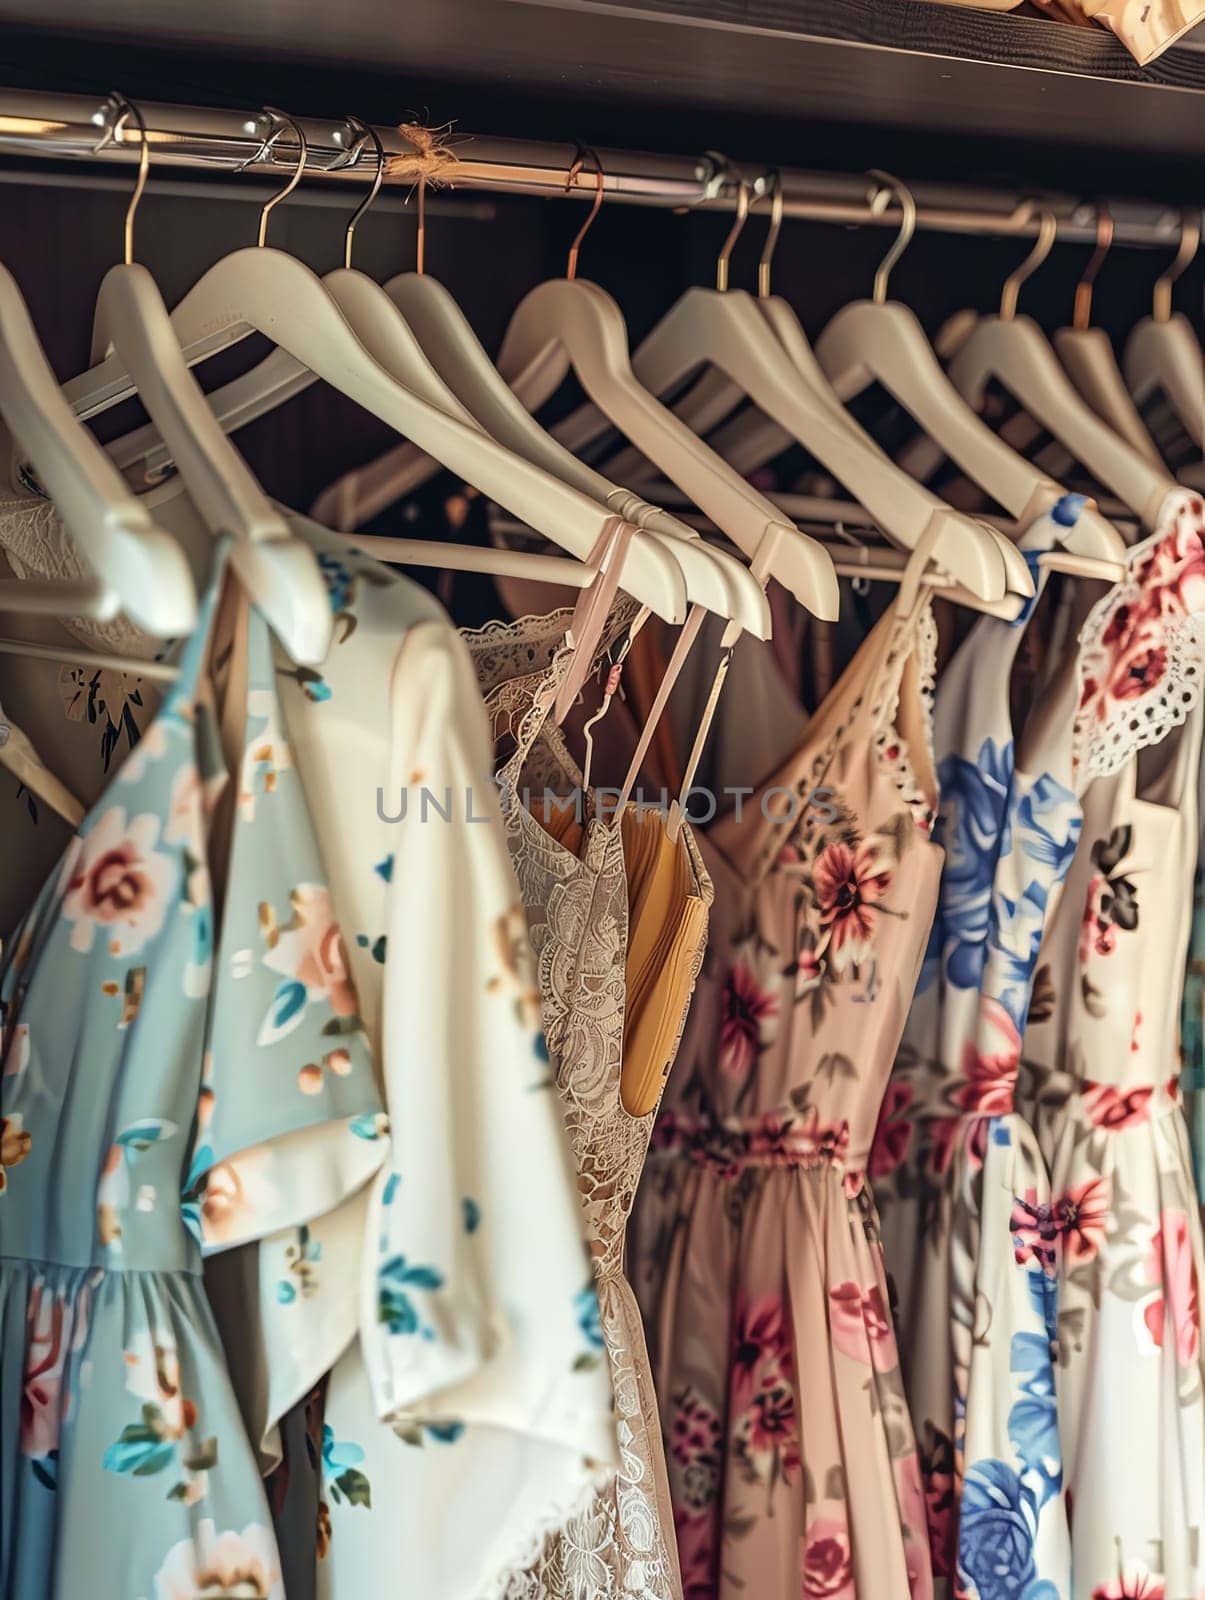 Various dresses and shirts displayed on hangers in a summer closet, reflecting a creative concept of a womens clothing showroom or designer dresses store.